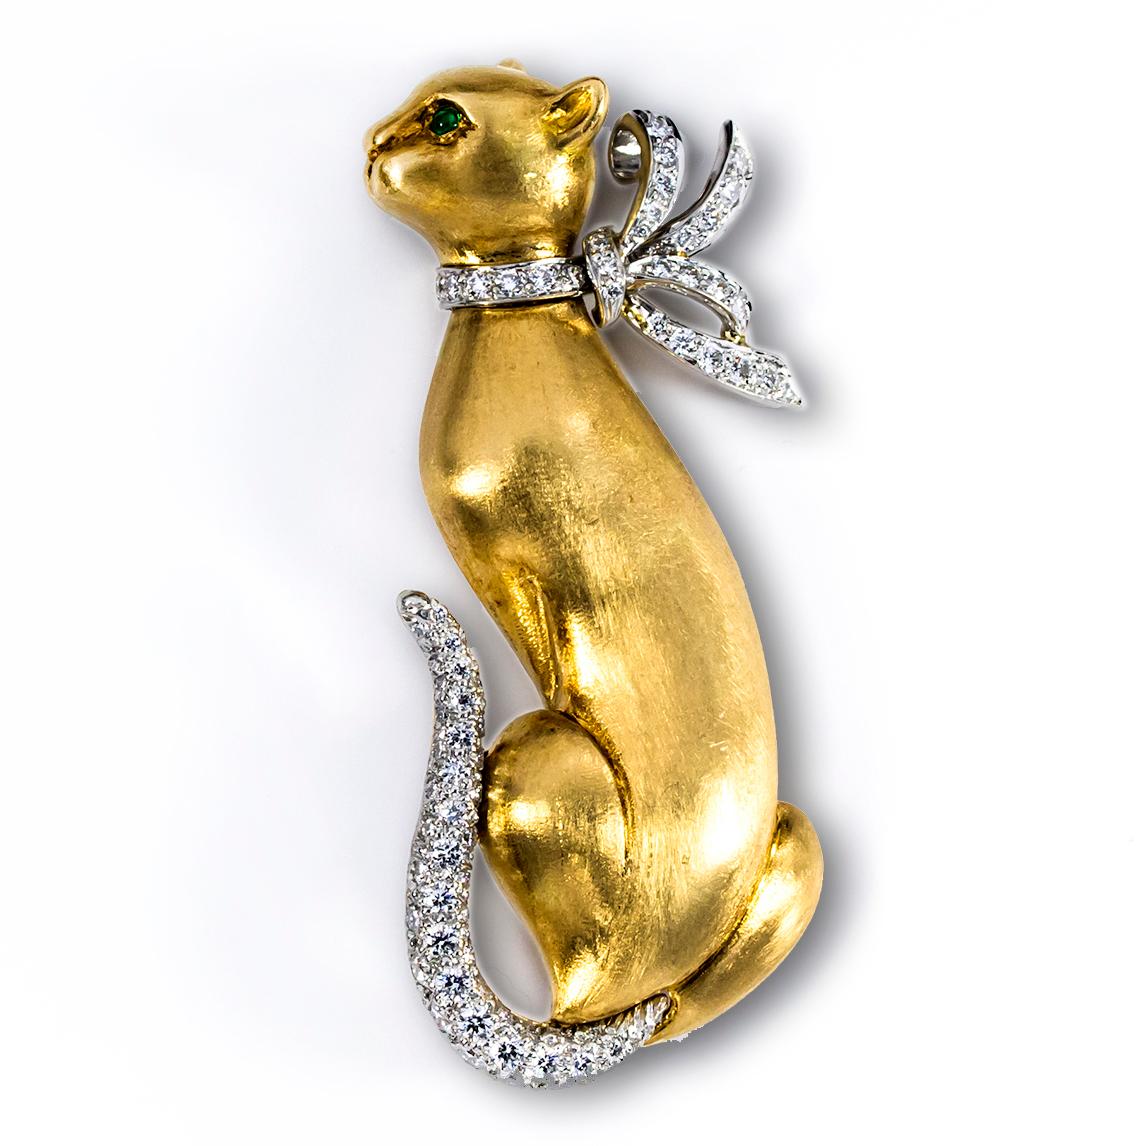 Oscar Heyman 18kt yellow gold and platinum sitting kitty brooch contains 1.51cts (F-G/VS+) of round diamonds and emerald eyes. It is stamped with the makers mark, 18K PLAT, and serial number 200421.

It measures 2.5 inches in length and 1 inch in